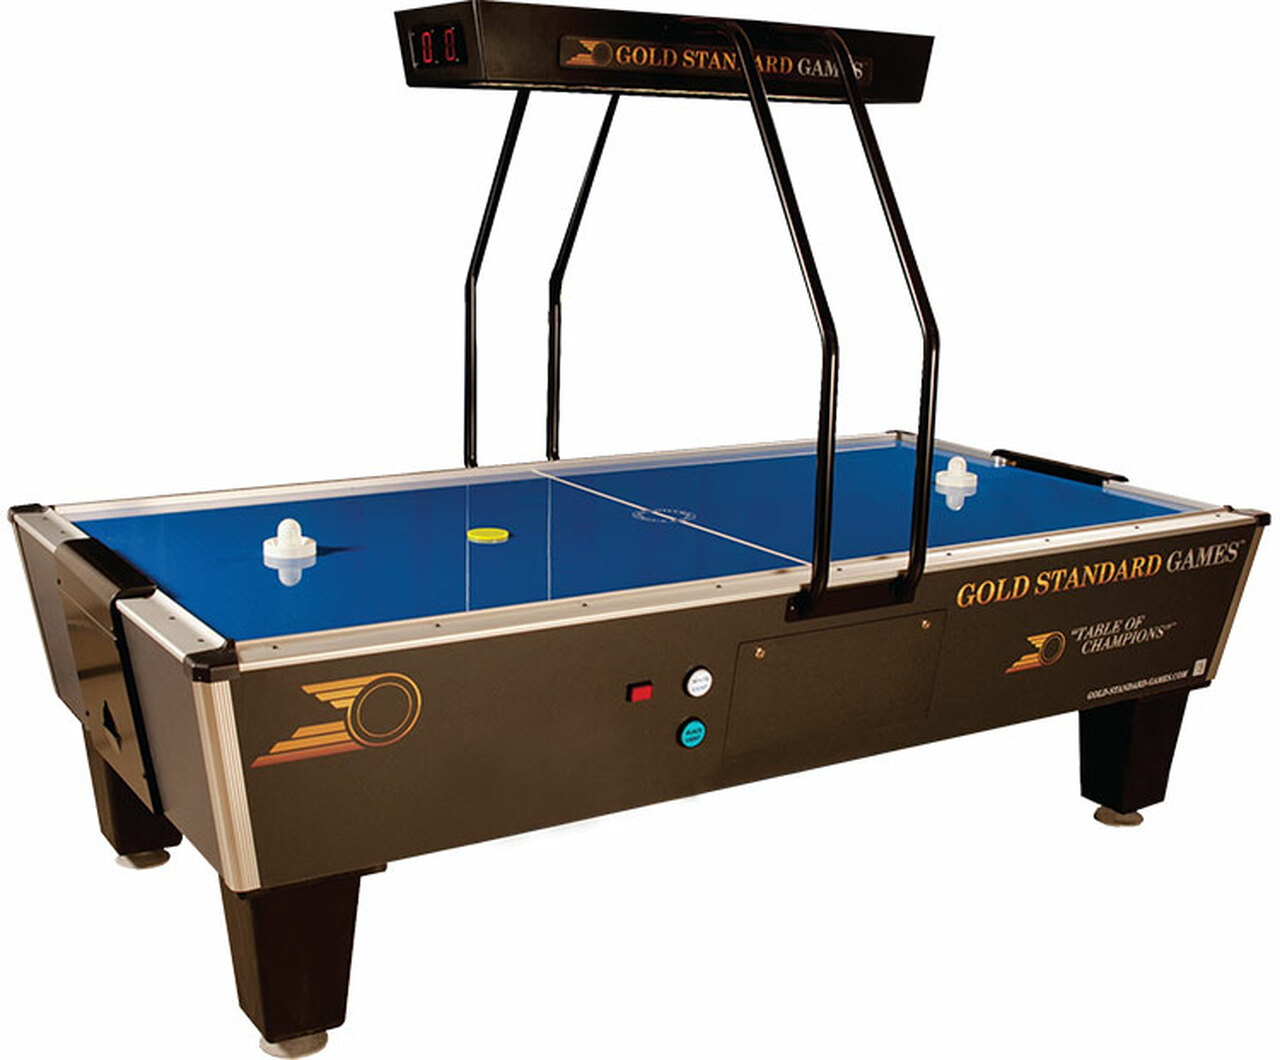 An 8 feet air hockey table with a blue-colored table surface, white pushers, and a scoring system above the playing field 